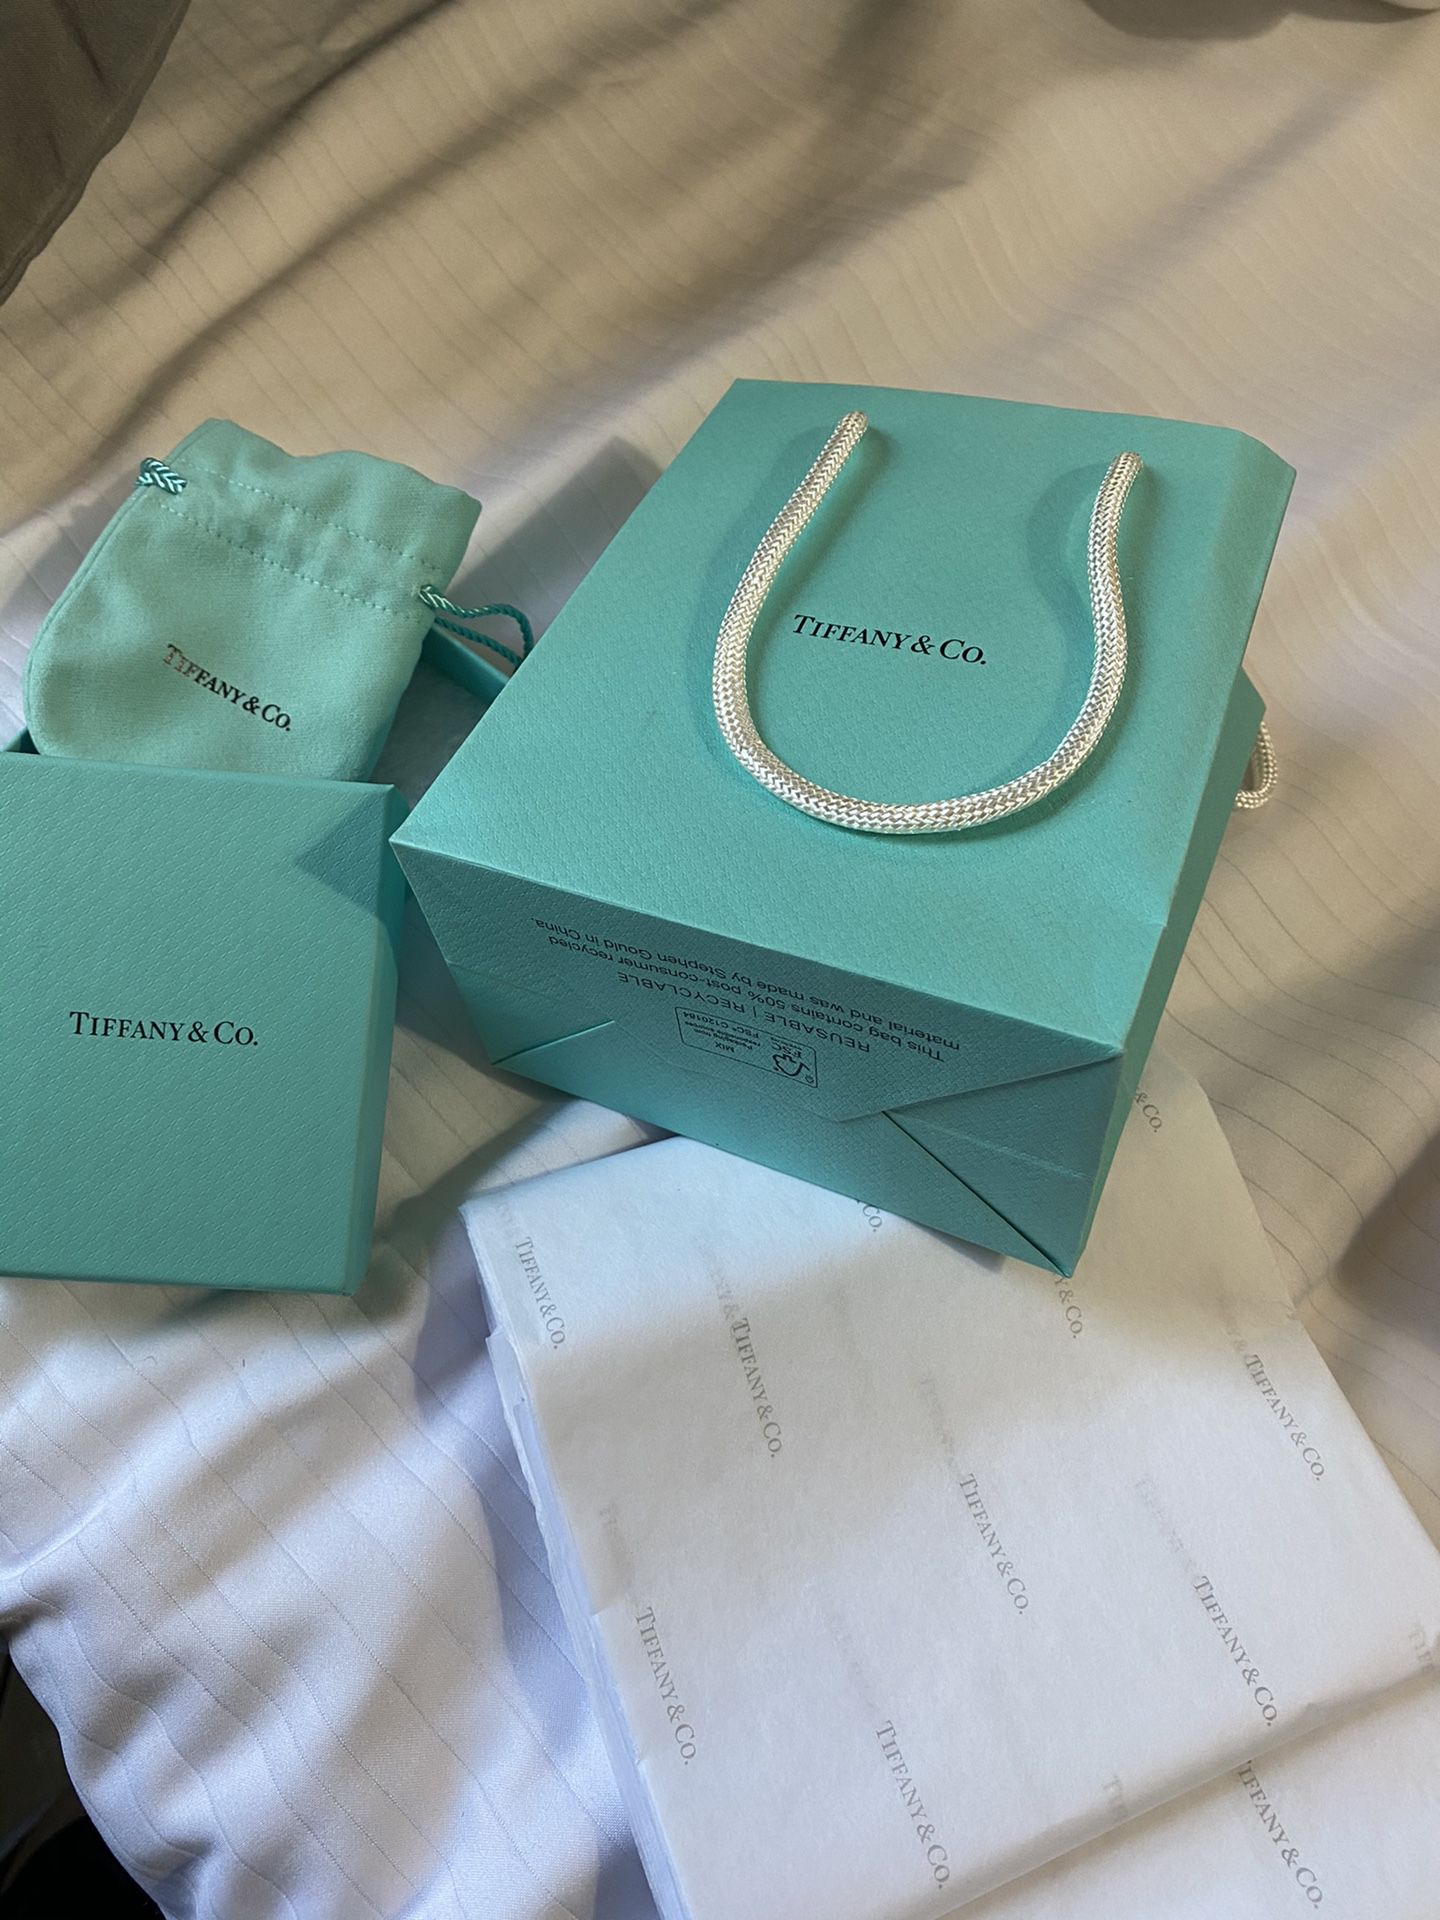 Tiffany & co box, tissue paper and material bag